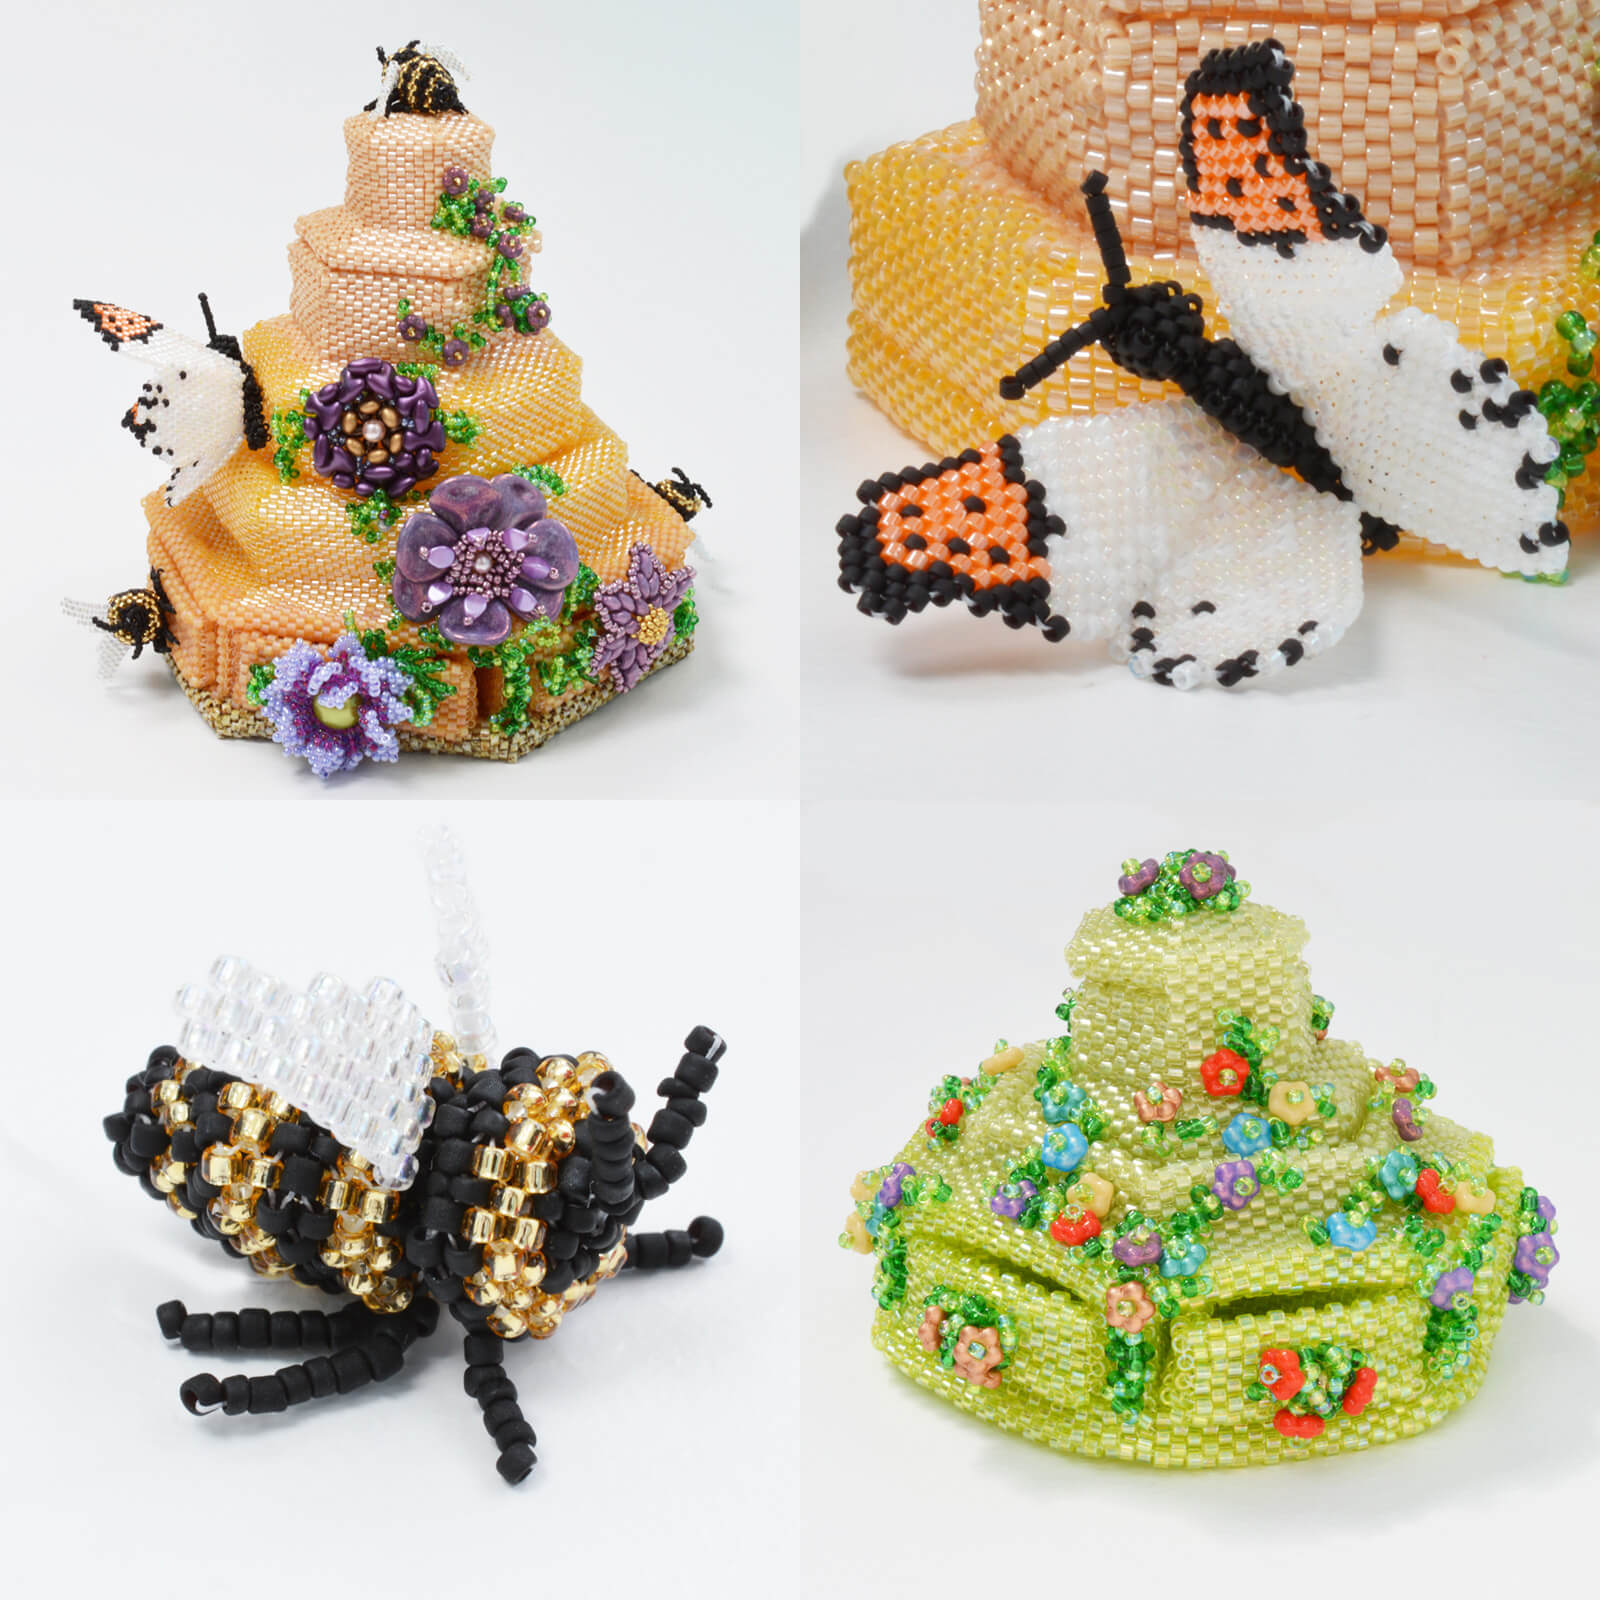 Beehive Beaded Box: How to make your own version, Katie Dean, Beadflowers